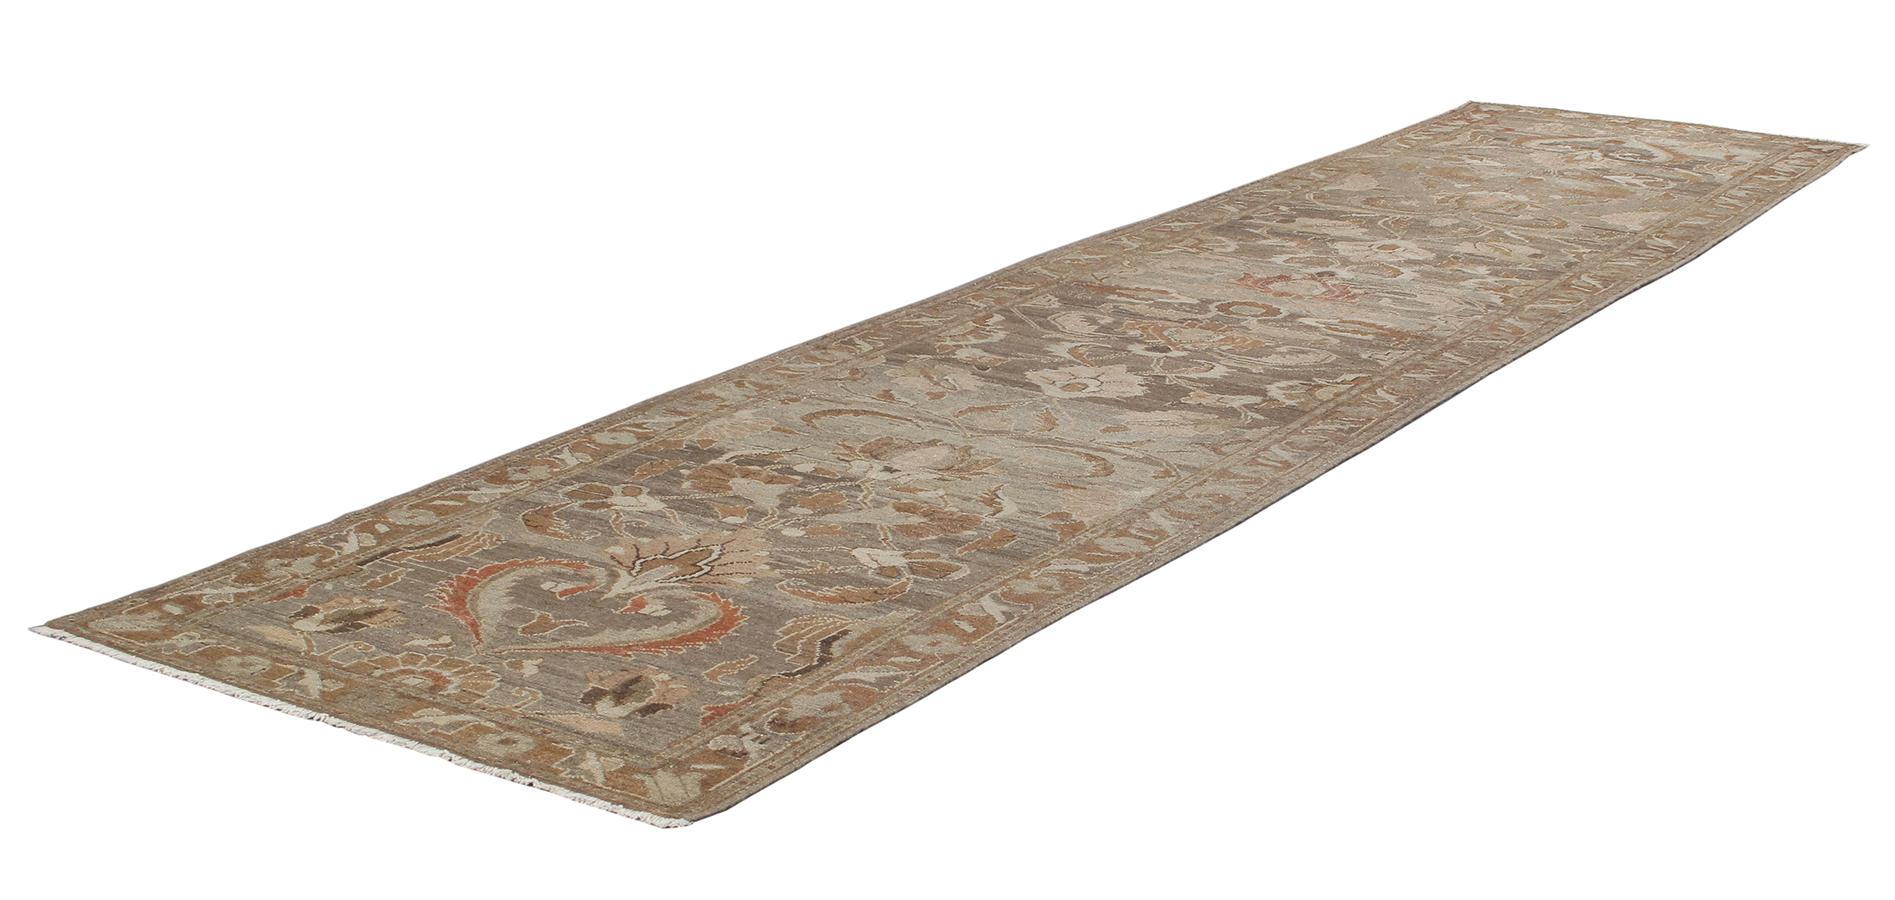 This antique Malayer runner is skillfully sourced by N A S I R I. Malayer rugs are named after a major rug-weaving village in central west Iran. The village was known for producing extremely fine rugs in the 19th century. These rugs are